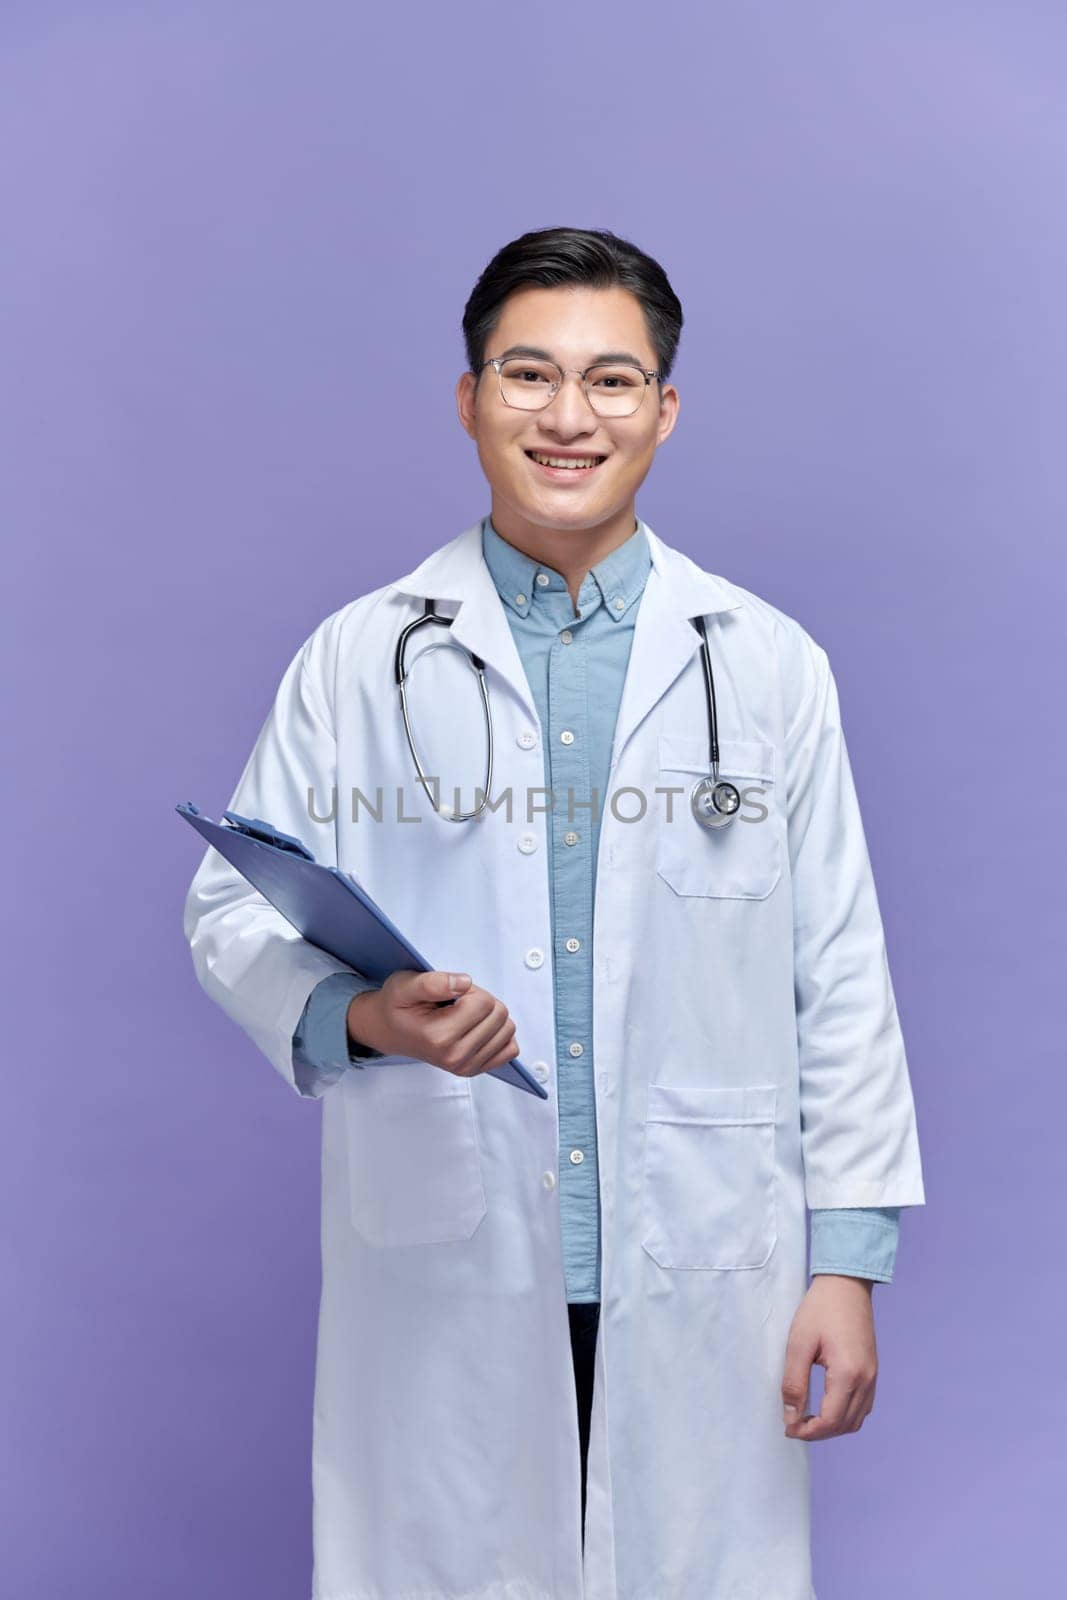 Male doctor standing with folder, isolated on purple background by makidotvn